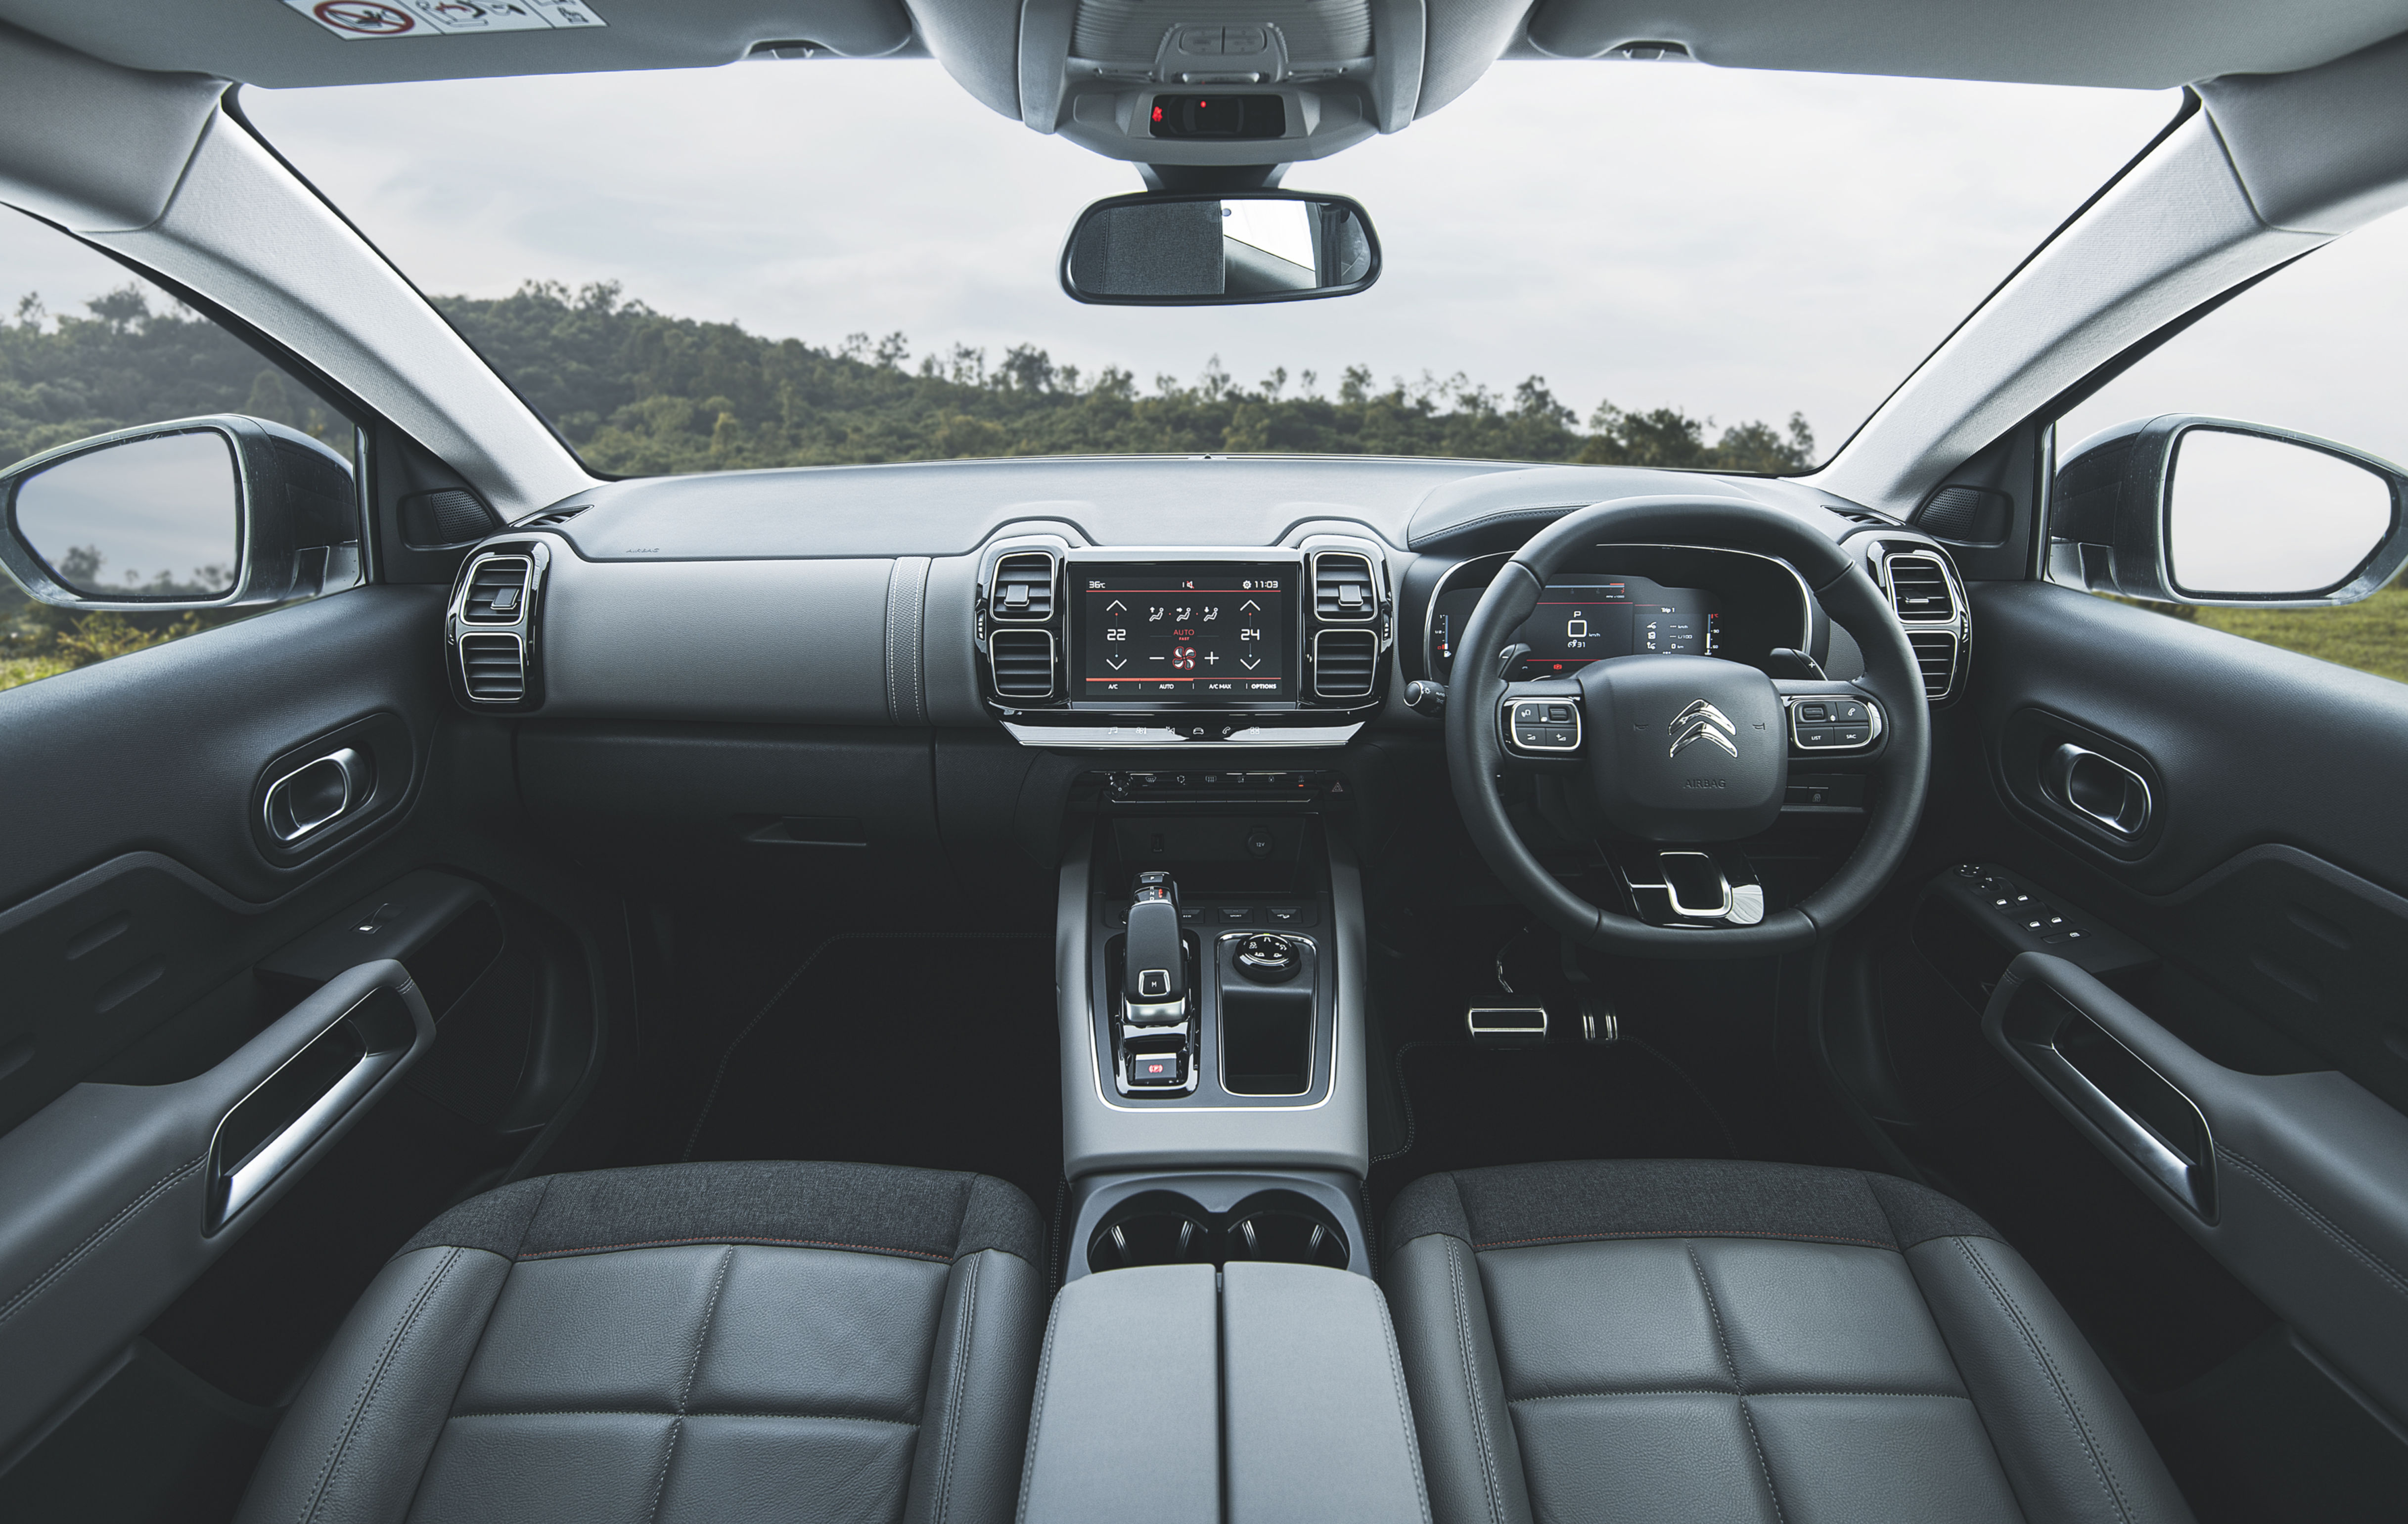 Expect a plush cabin inside the C5 Aircross with an eight-inch main screen and a slightly larger driver display.